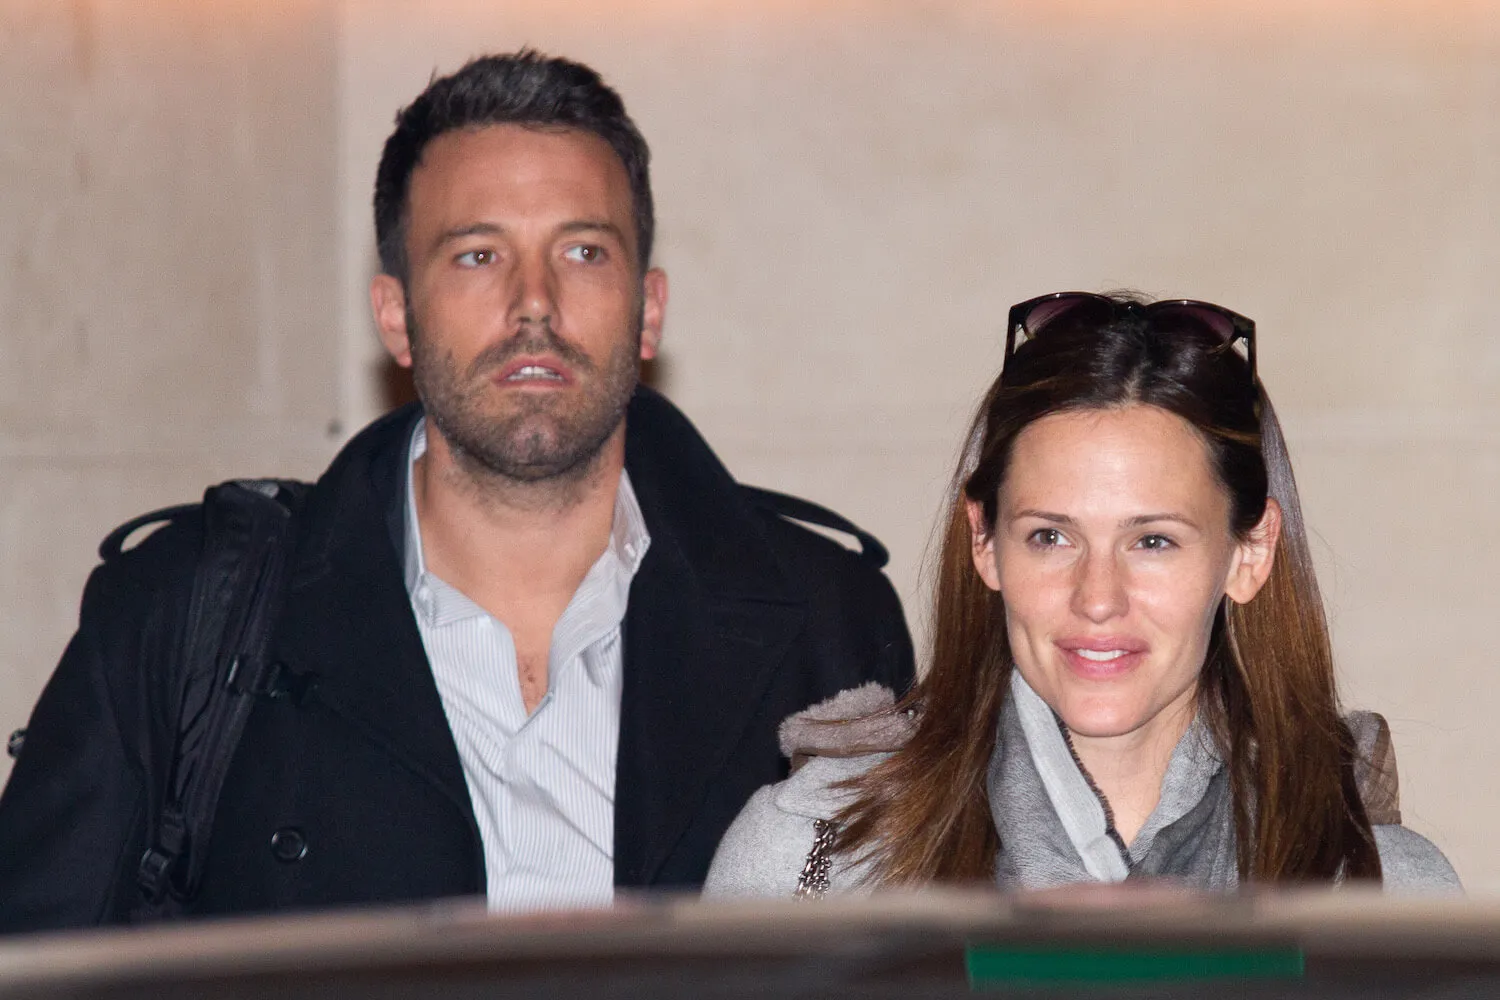 Ben Affleck and Jennifer Garner dressed casually while leaving a hotel in France in 2012